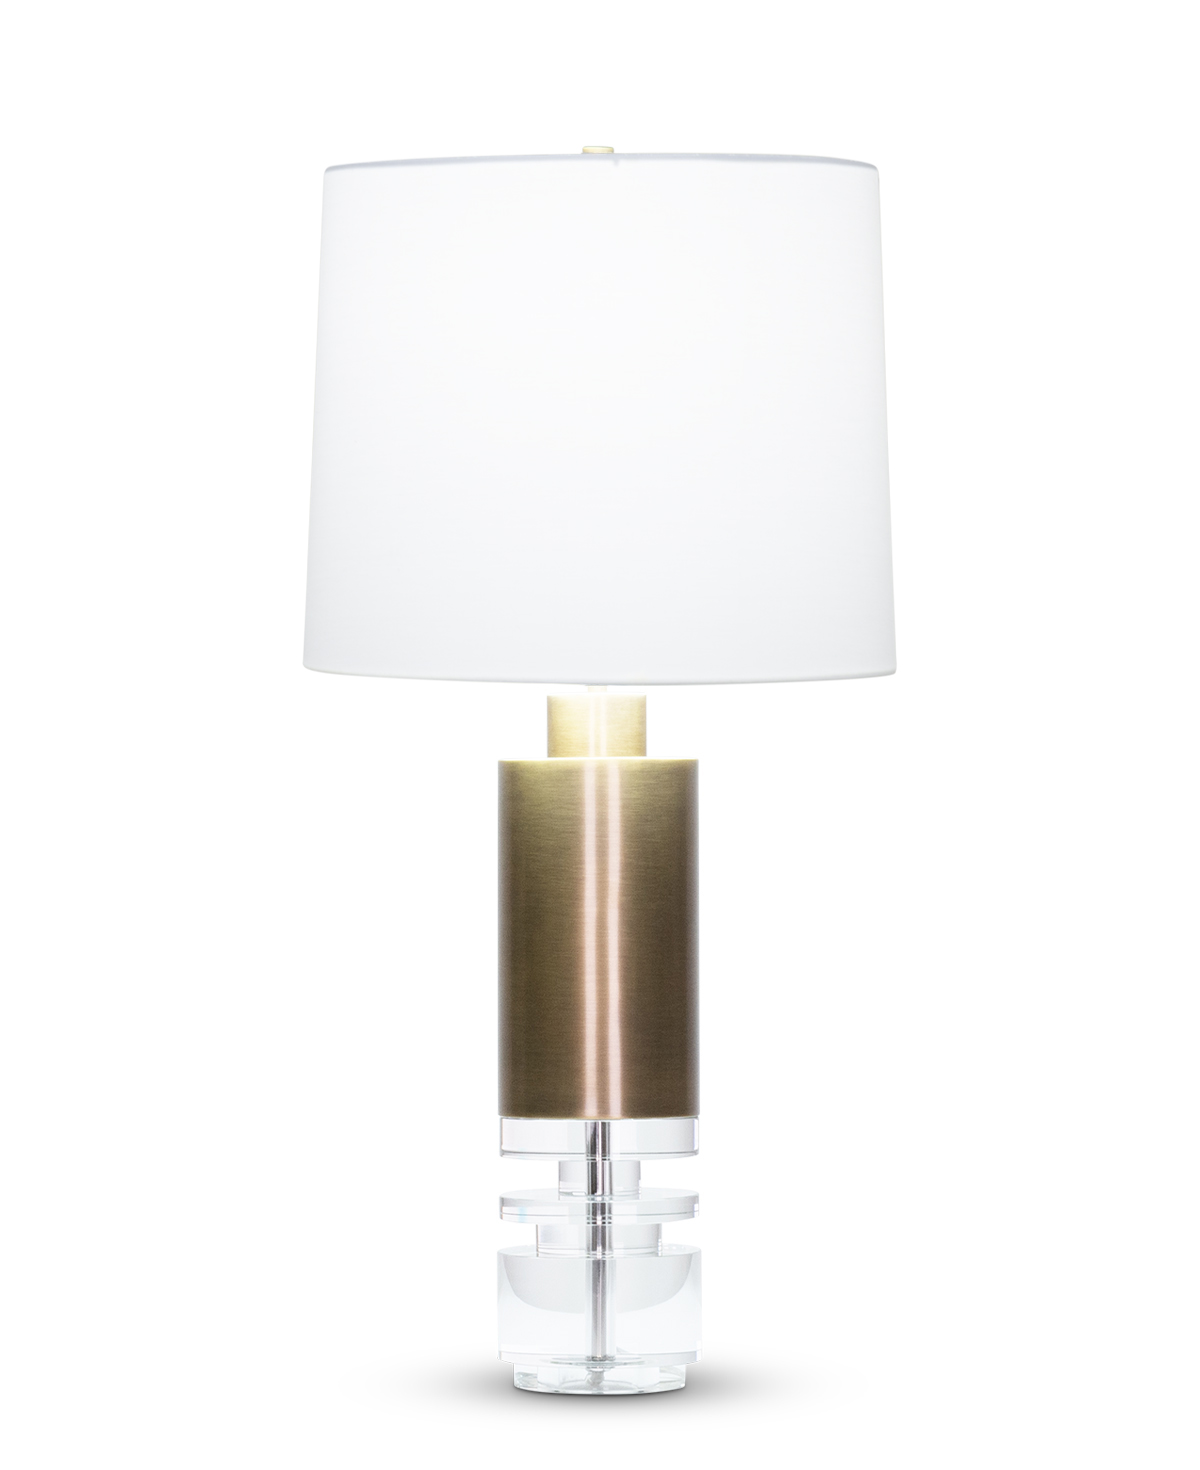 FlowDecor Scott Table Lamp in crystal and metal with antique brass finish and off-white cotton tapered drum shade (# 4527)